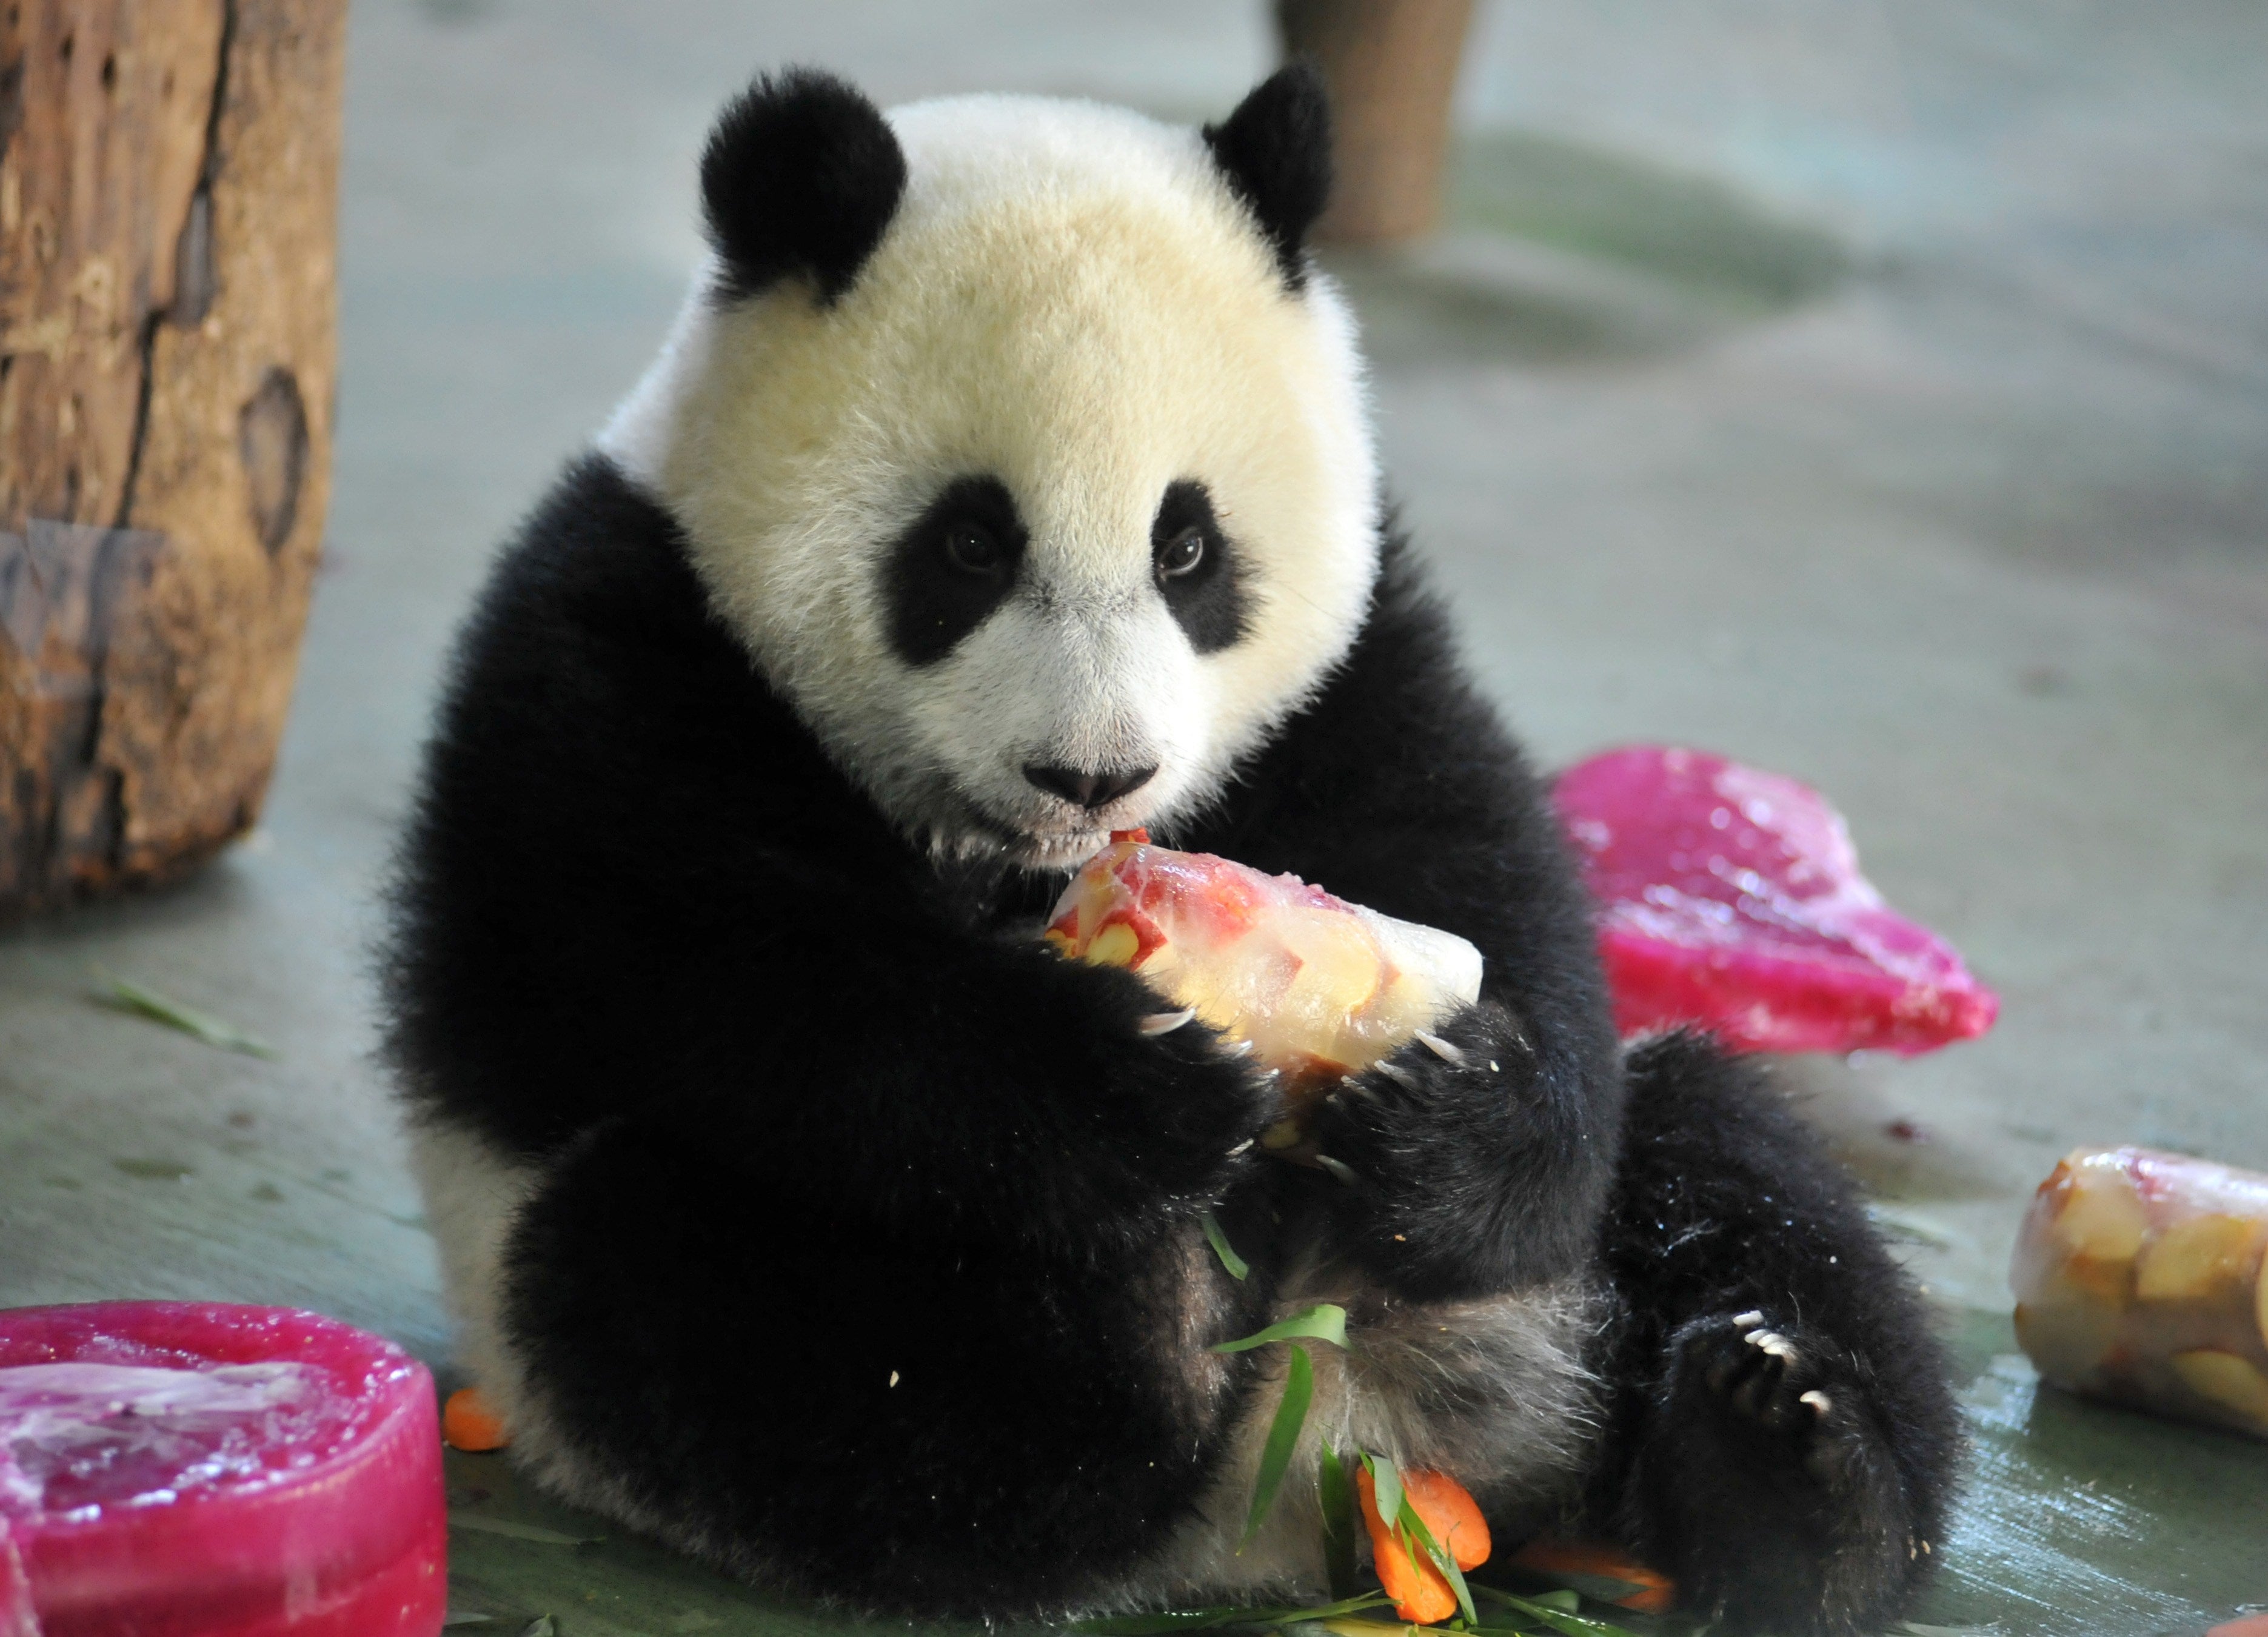 Yuan Zai enjoys its birthday cake during the celebration of its first birthday at the Taipei City Zoo on 6 July 2014